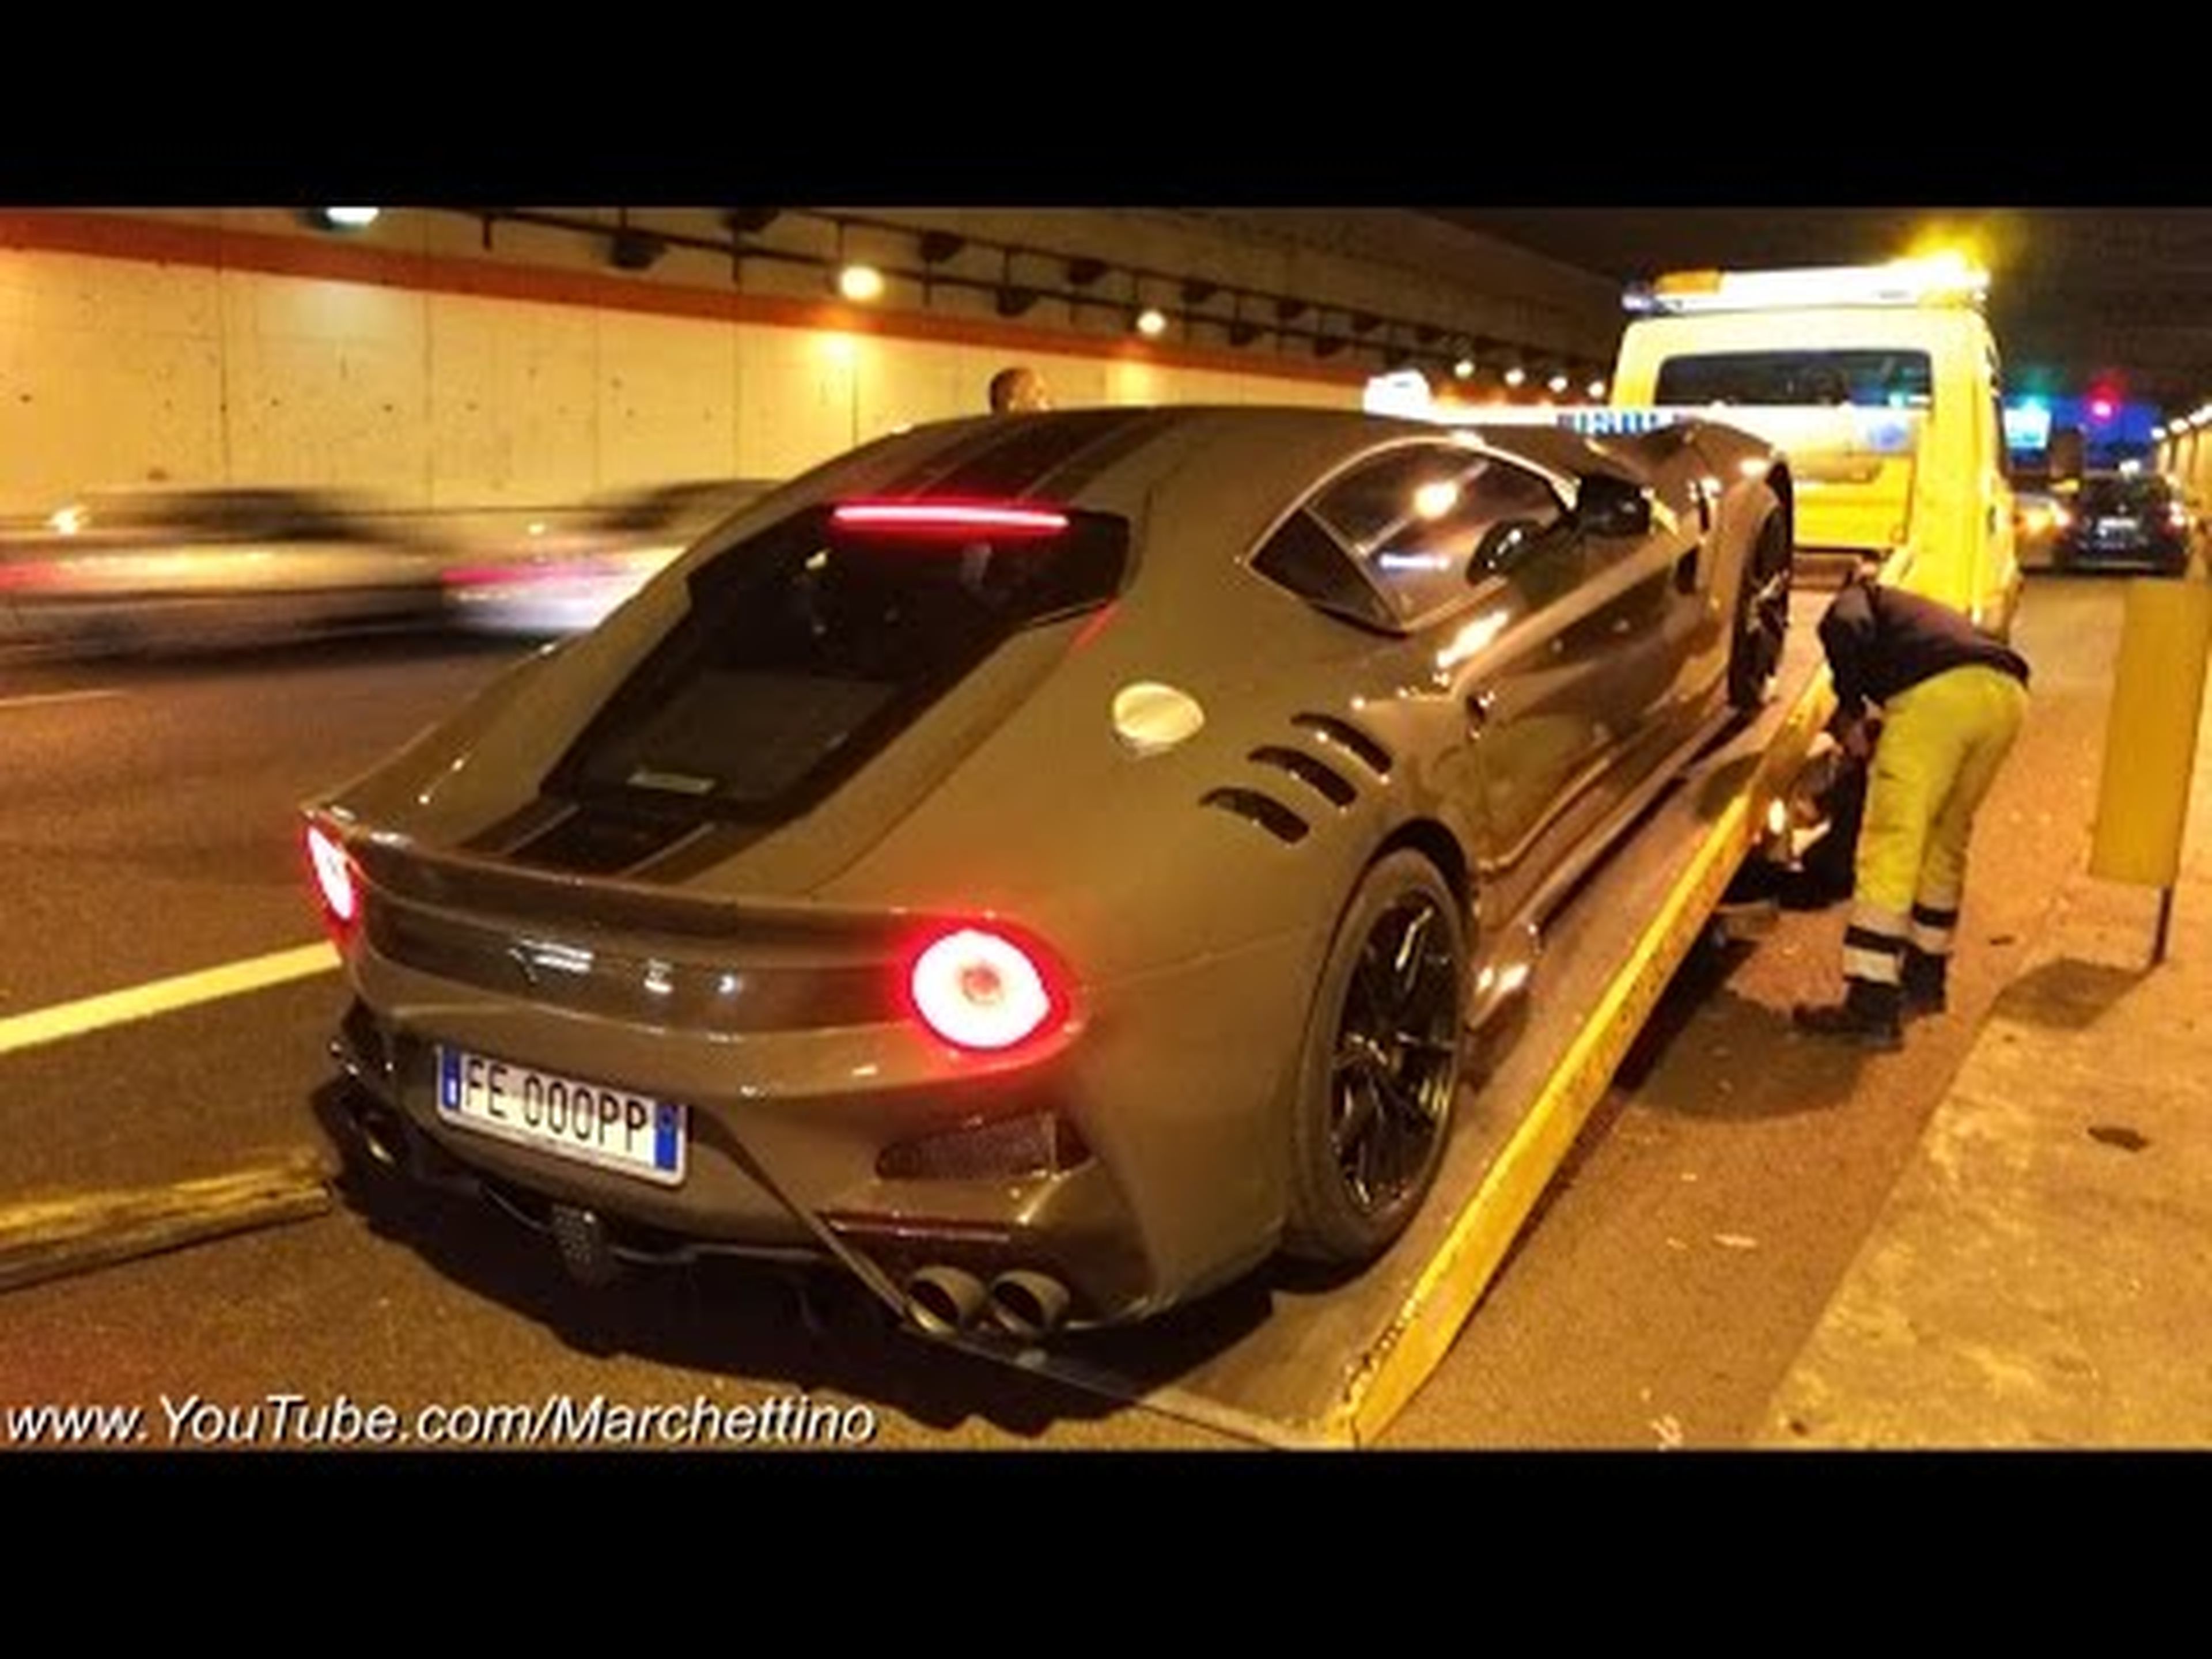 Running out of fuel in a Ferrari F12 TDF - w/ Secondotestomale